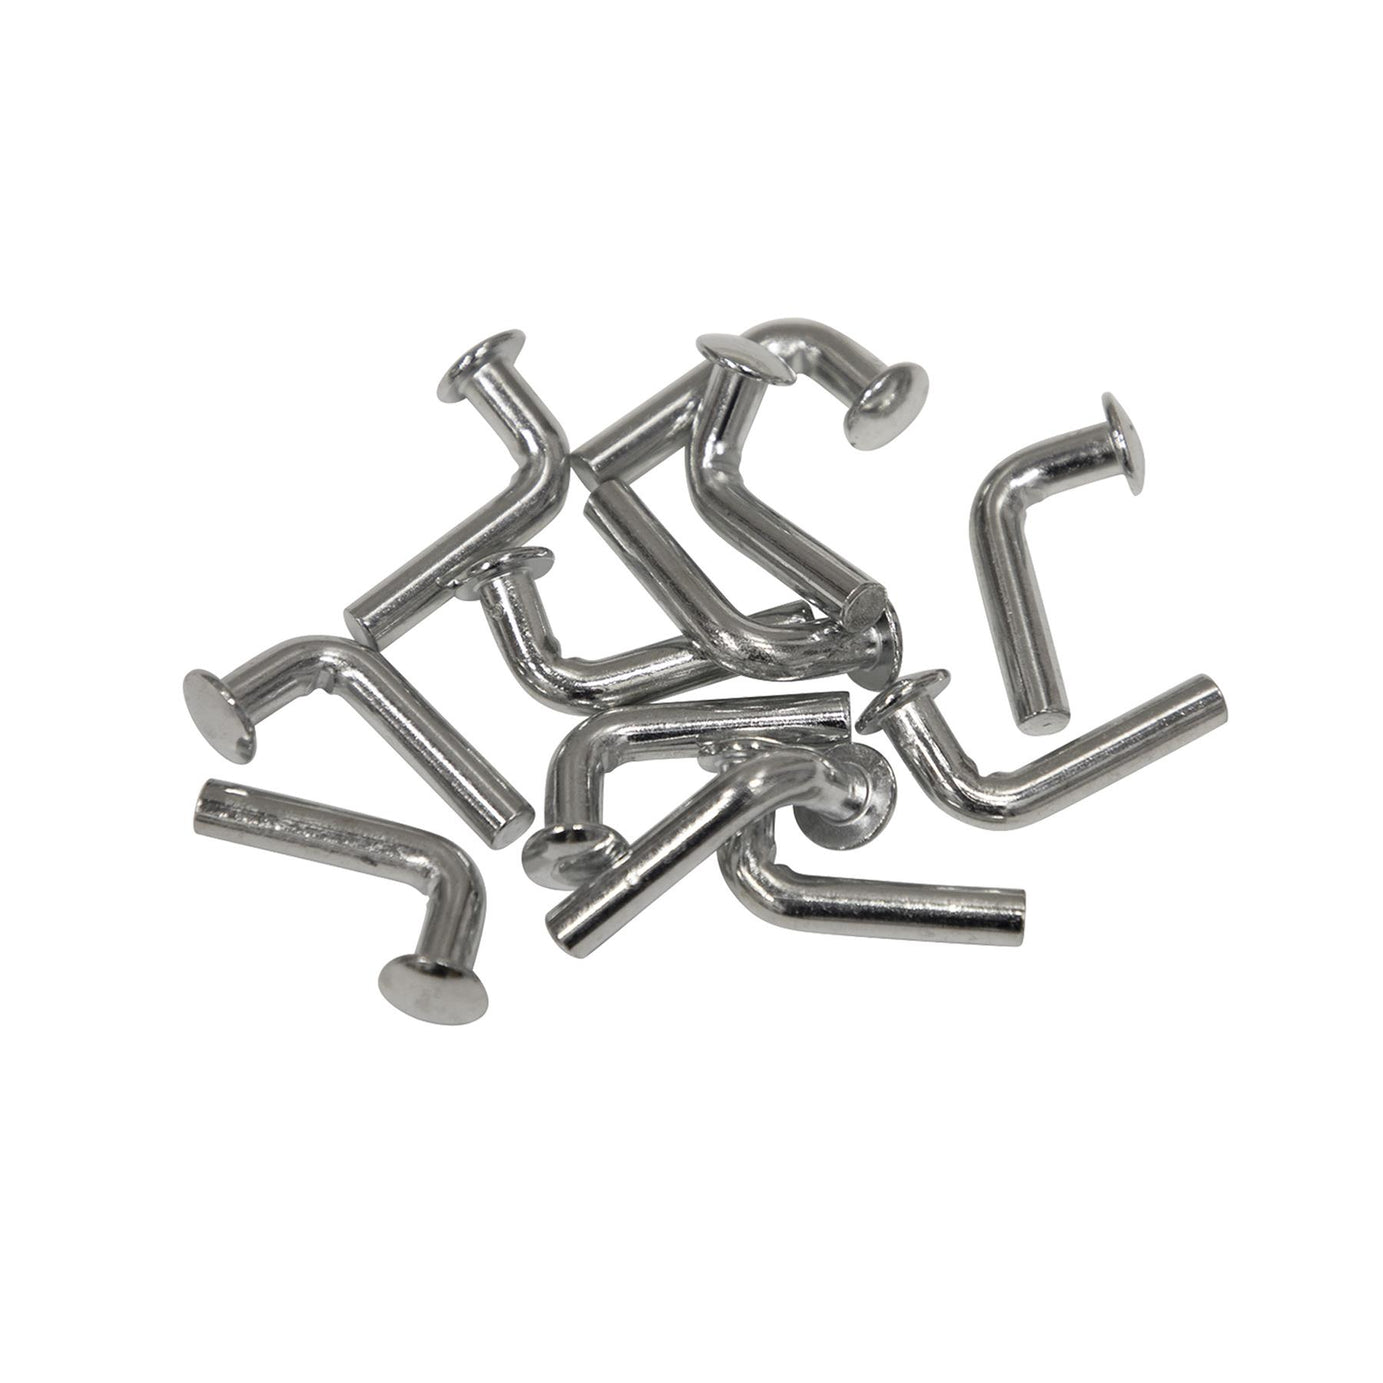 Sealey Safety Locking Pin Supplied In A Pack Of 12 Pins.